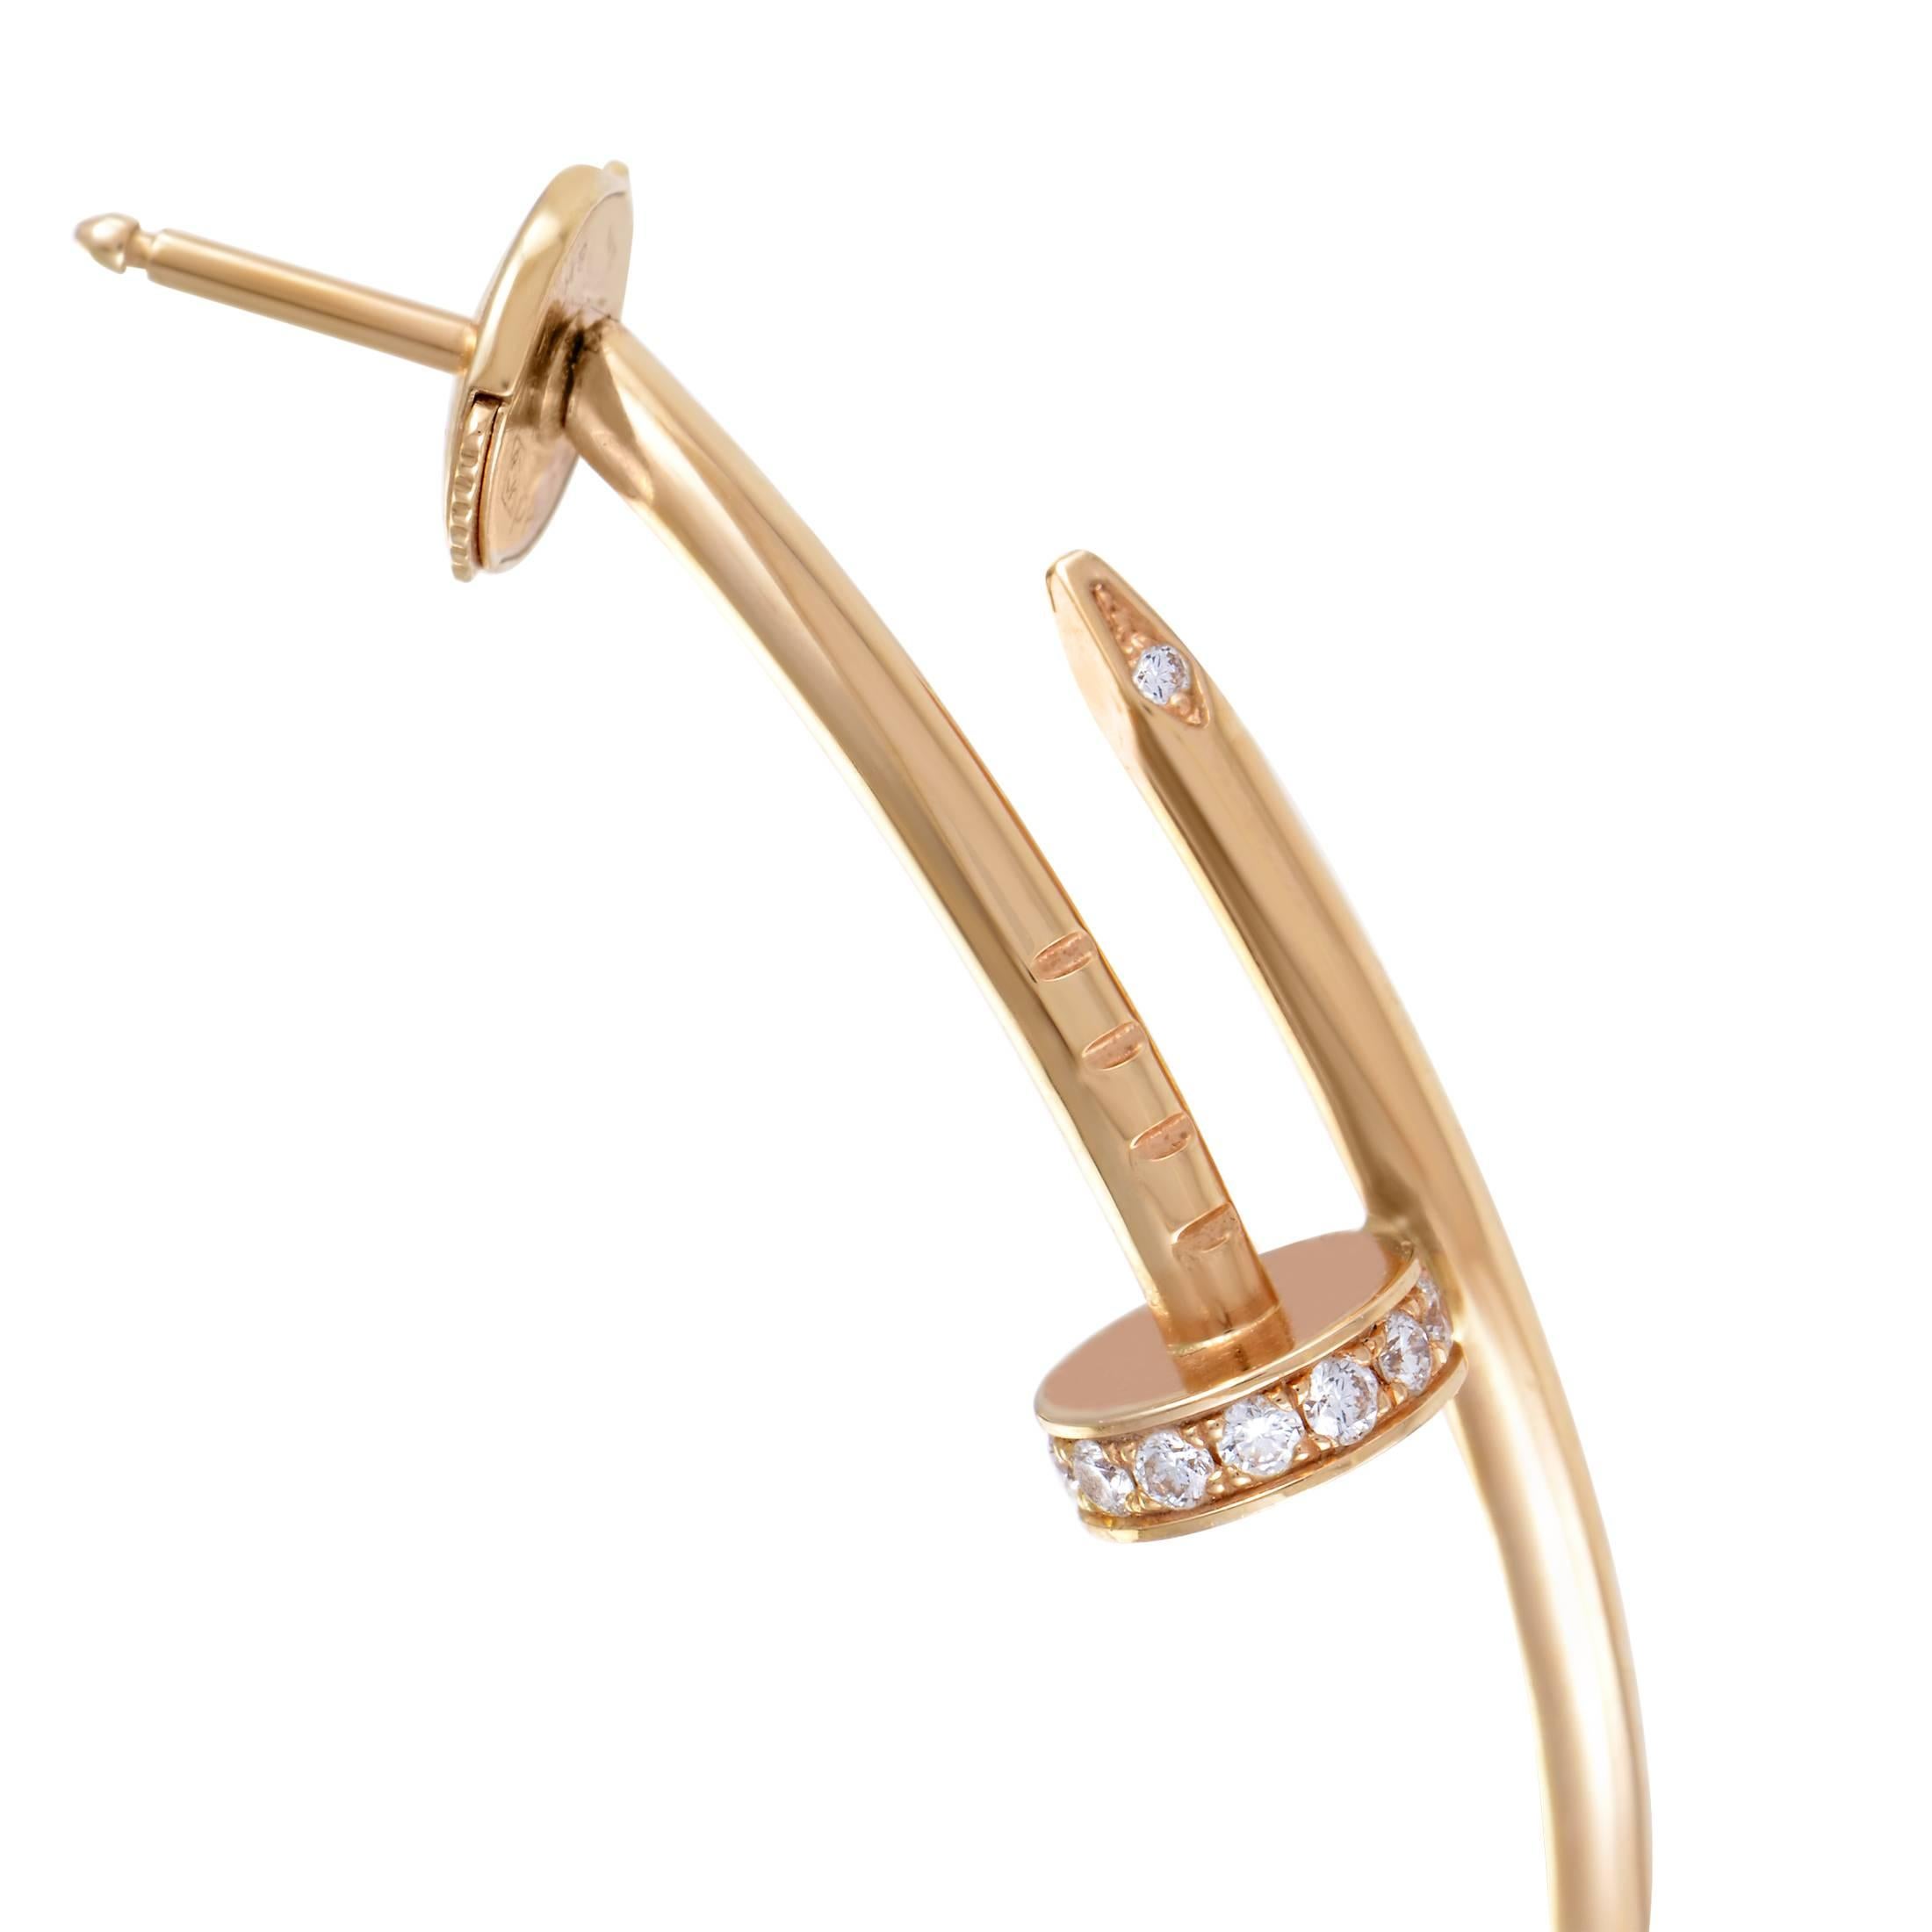 Allowing the enchanting radiance of precious 18K rose gold to shine with an exceptional gleam through an elegant design and immaculate finish, Cartier present these fabulous Juste un Clou earrings in the intriguing form of nails embellished with